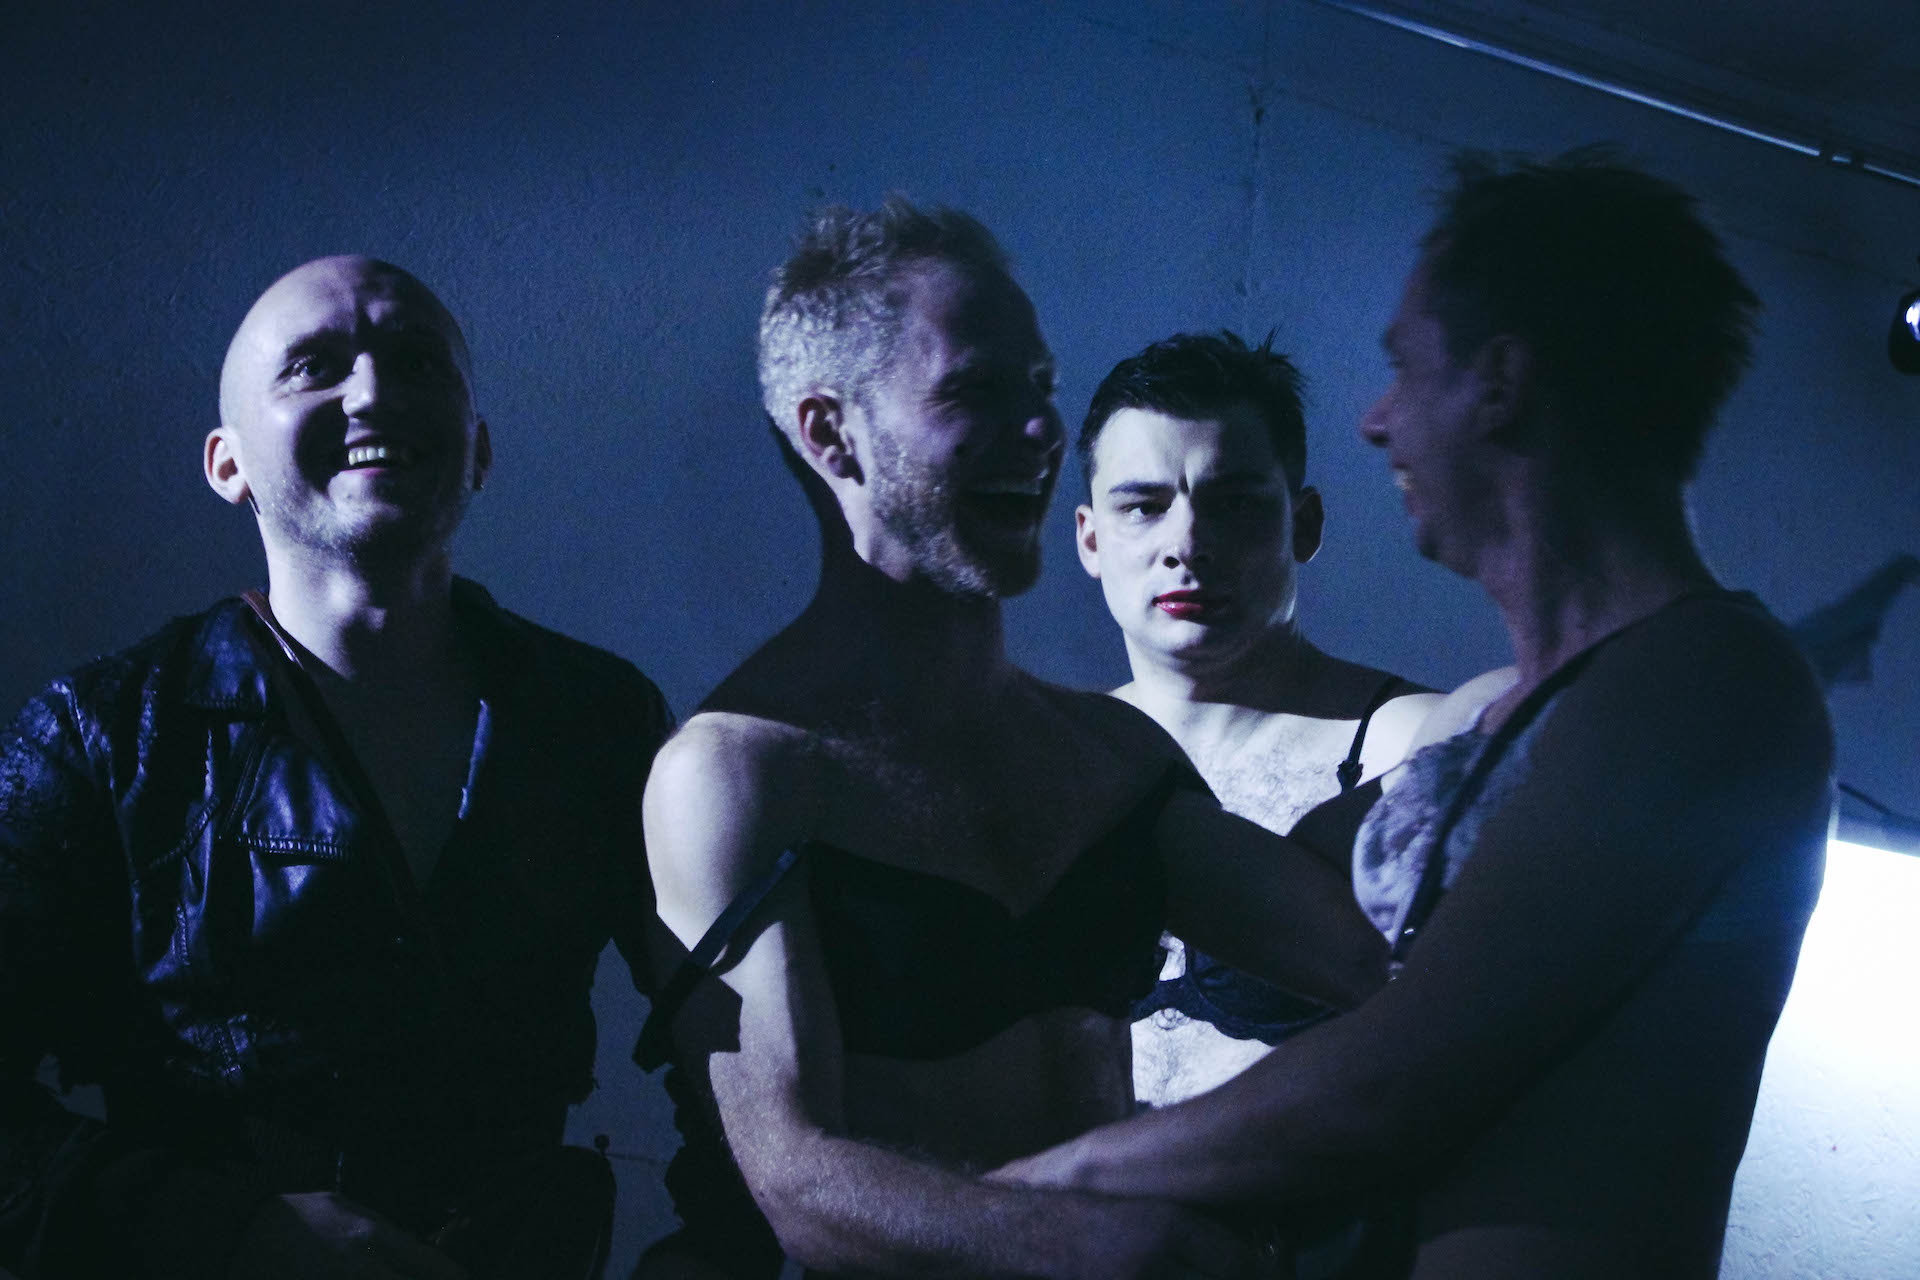 In a dark blue lighted room, four performers are smiling and hugging each other except for one.